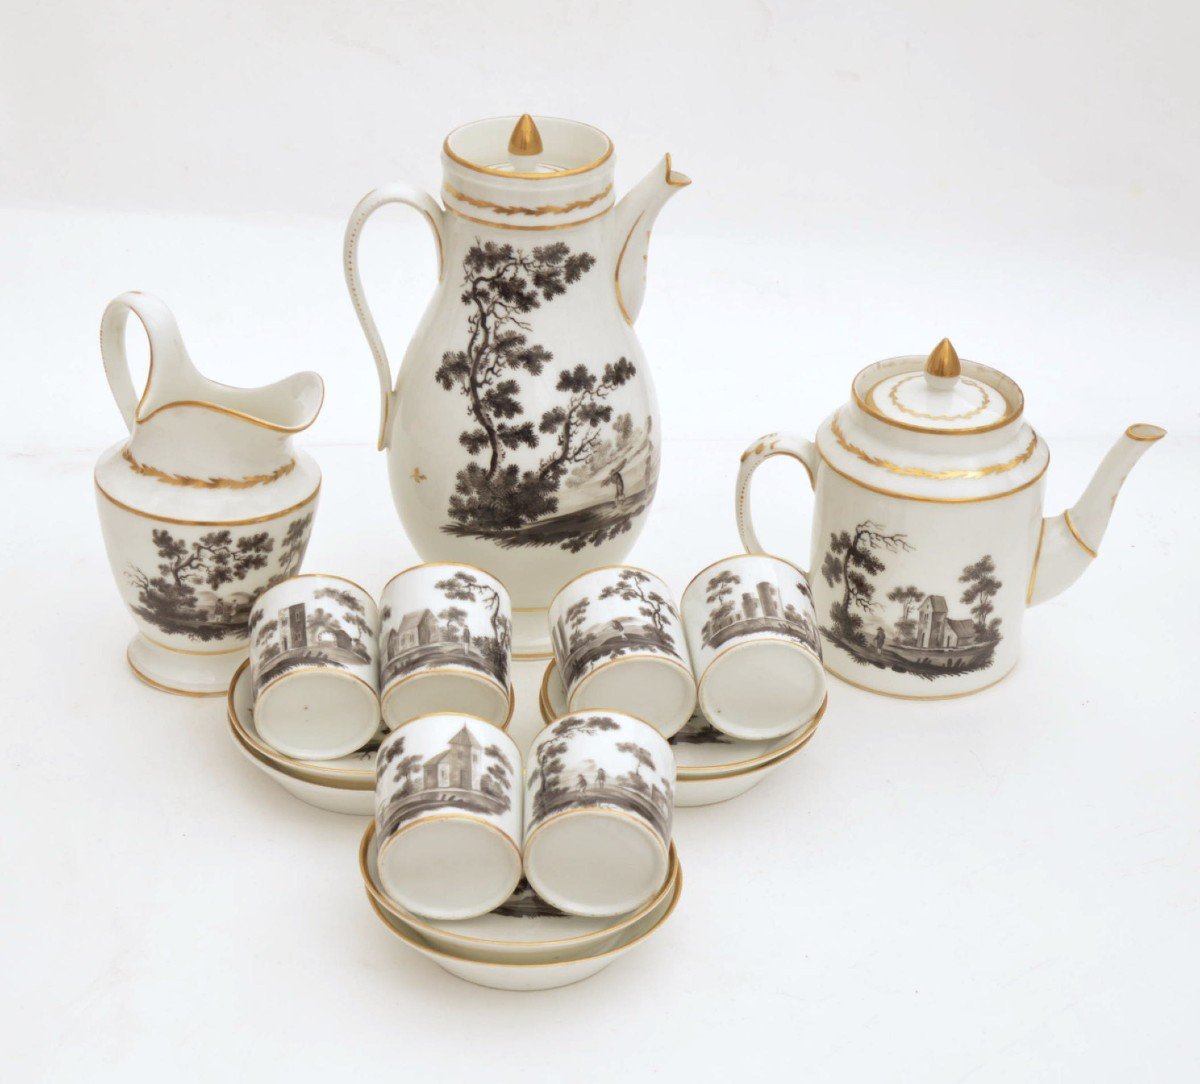 Brussels Porcelain Tea And Coffee Service Painted In Grisaille And Enhanced With Gold XIXth C